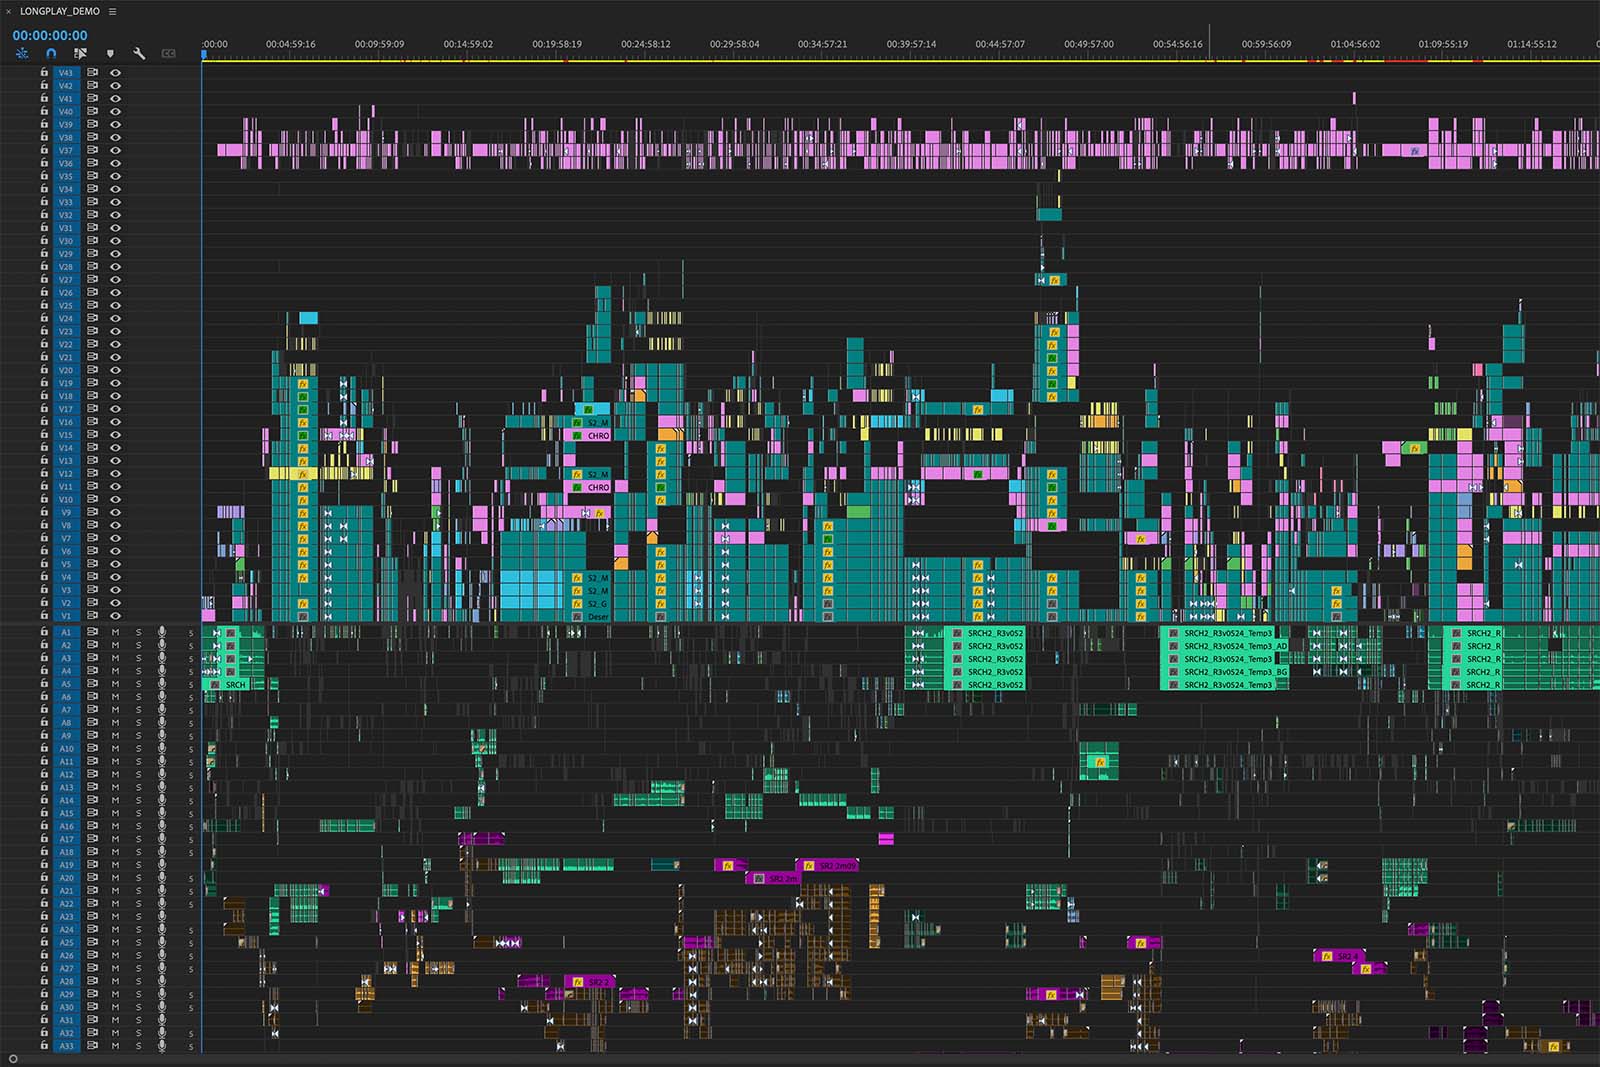 Cropped detail of the Premiere Pro timeline for Missing. To fully appreciate the work that went into this, view the full-size version.